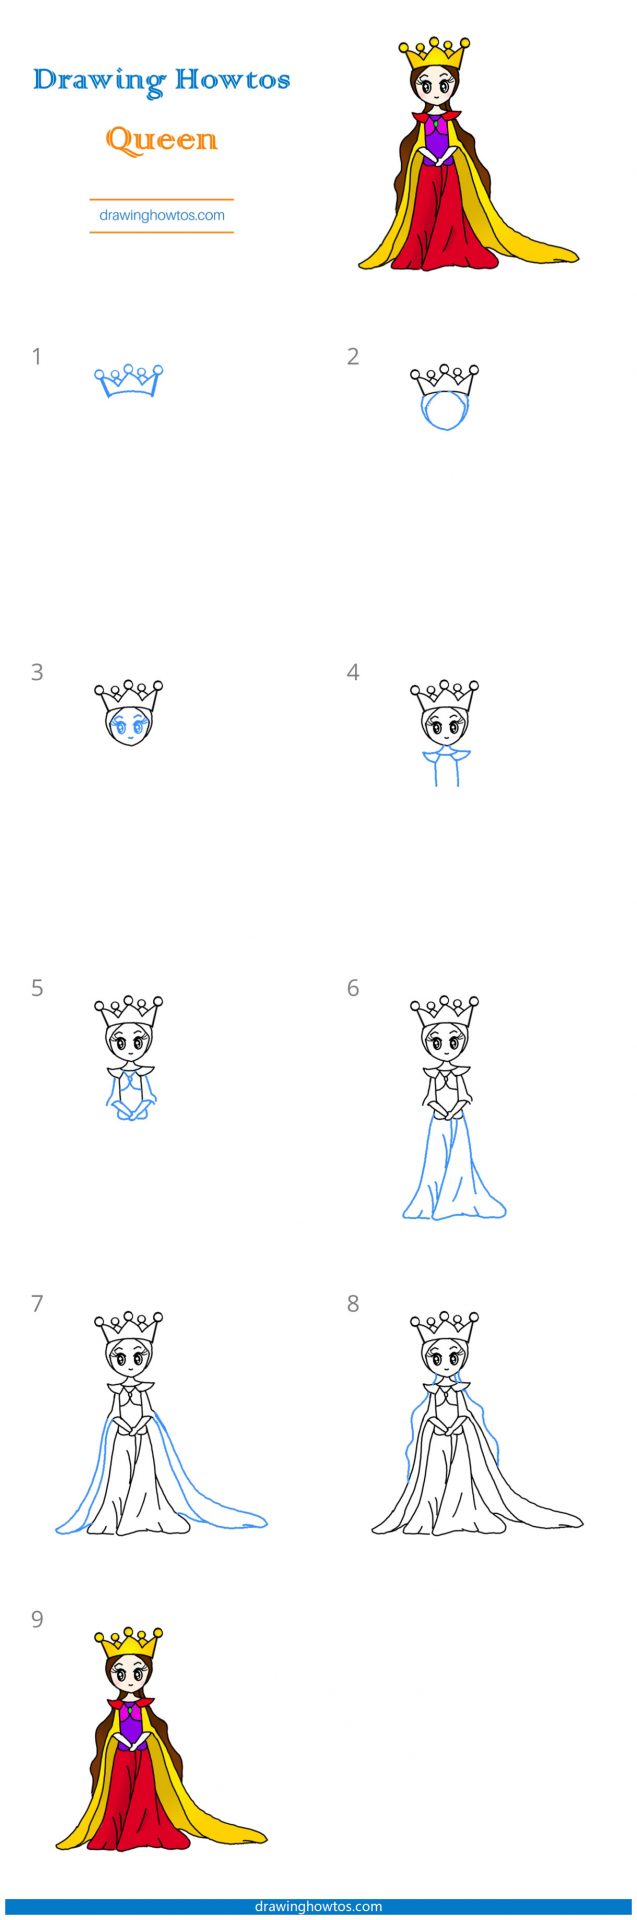 How to Draw a Queen Step by Step